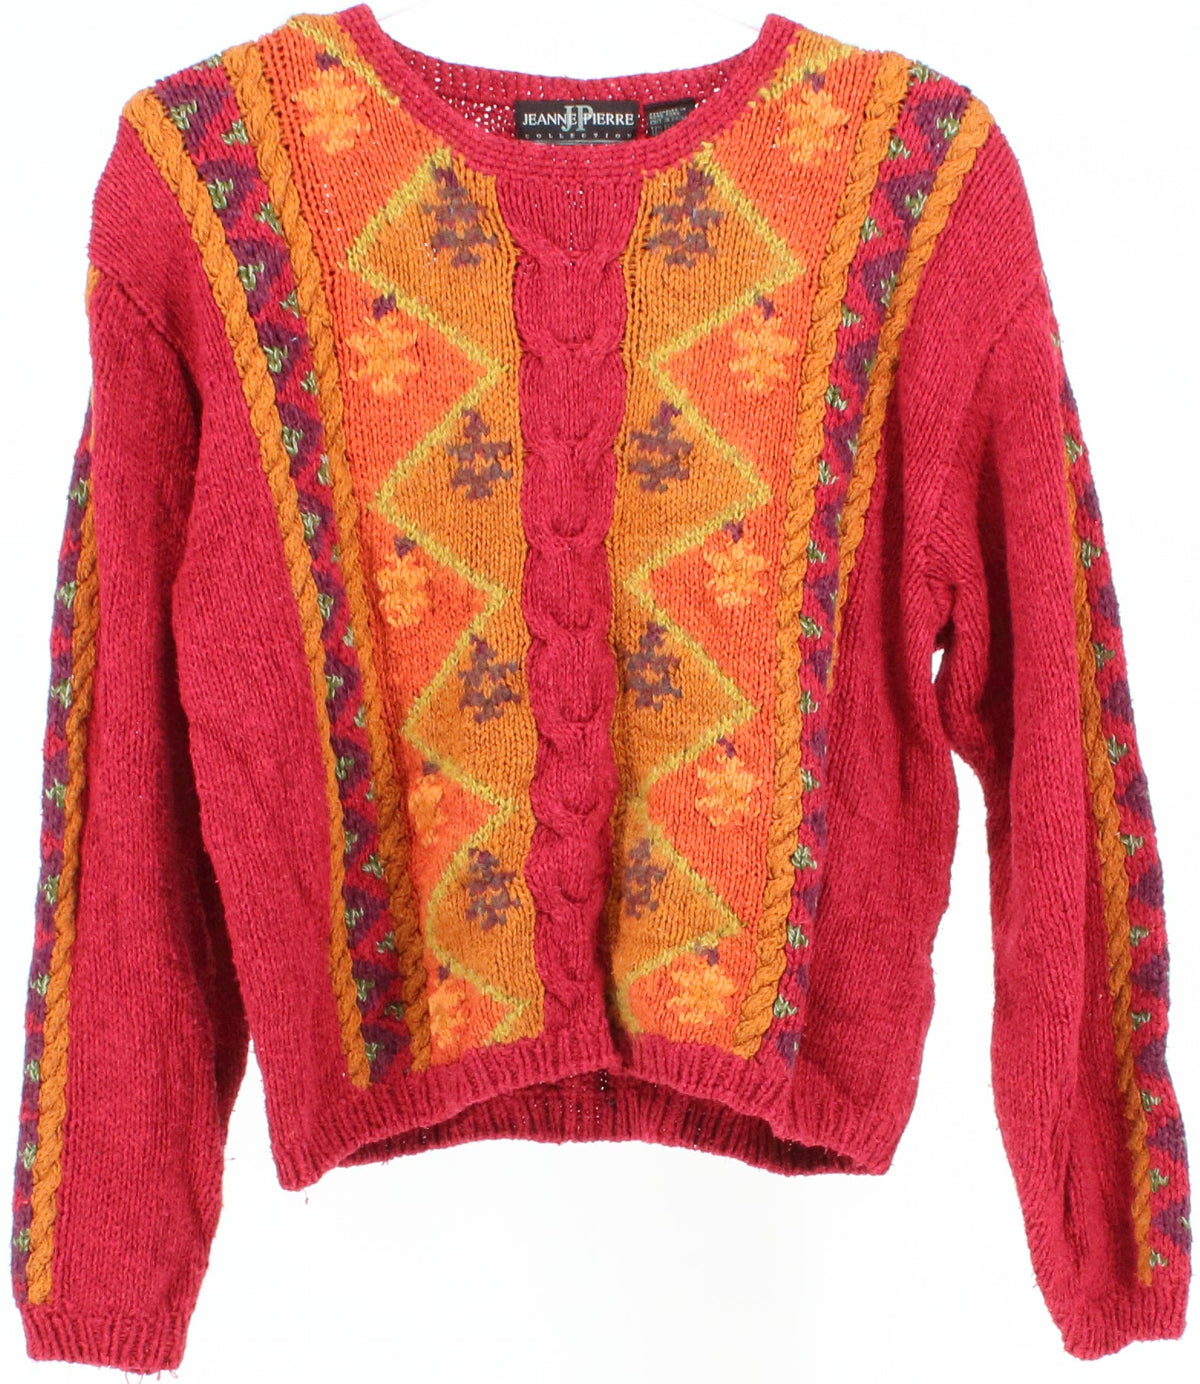 Jeanne Pierre Red and Multicolor Women's Sweater